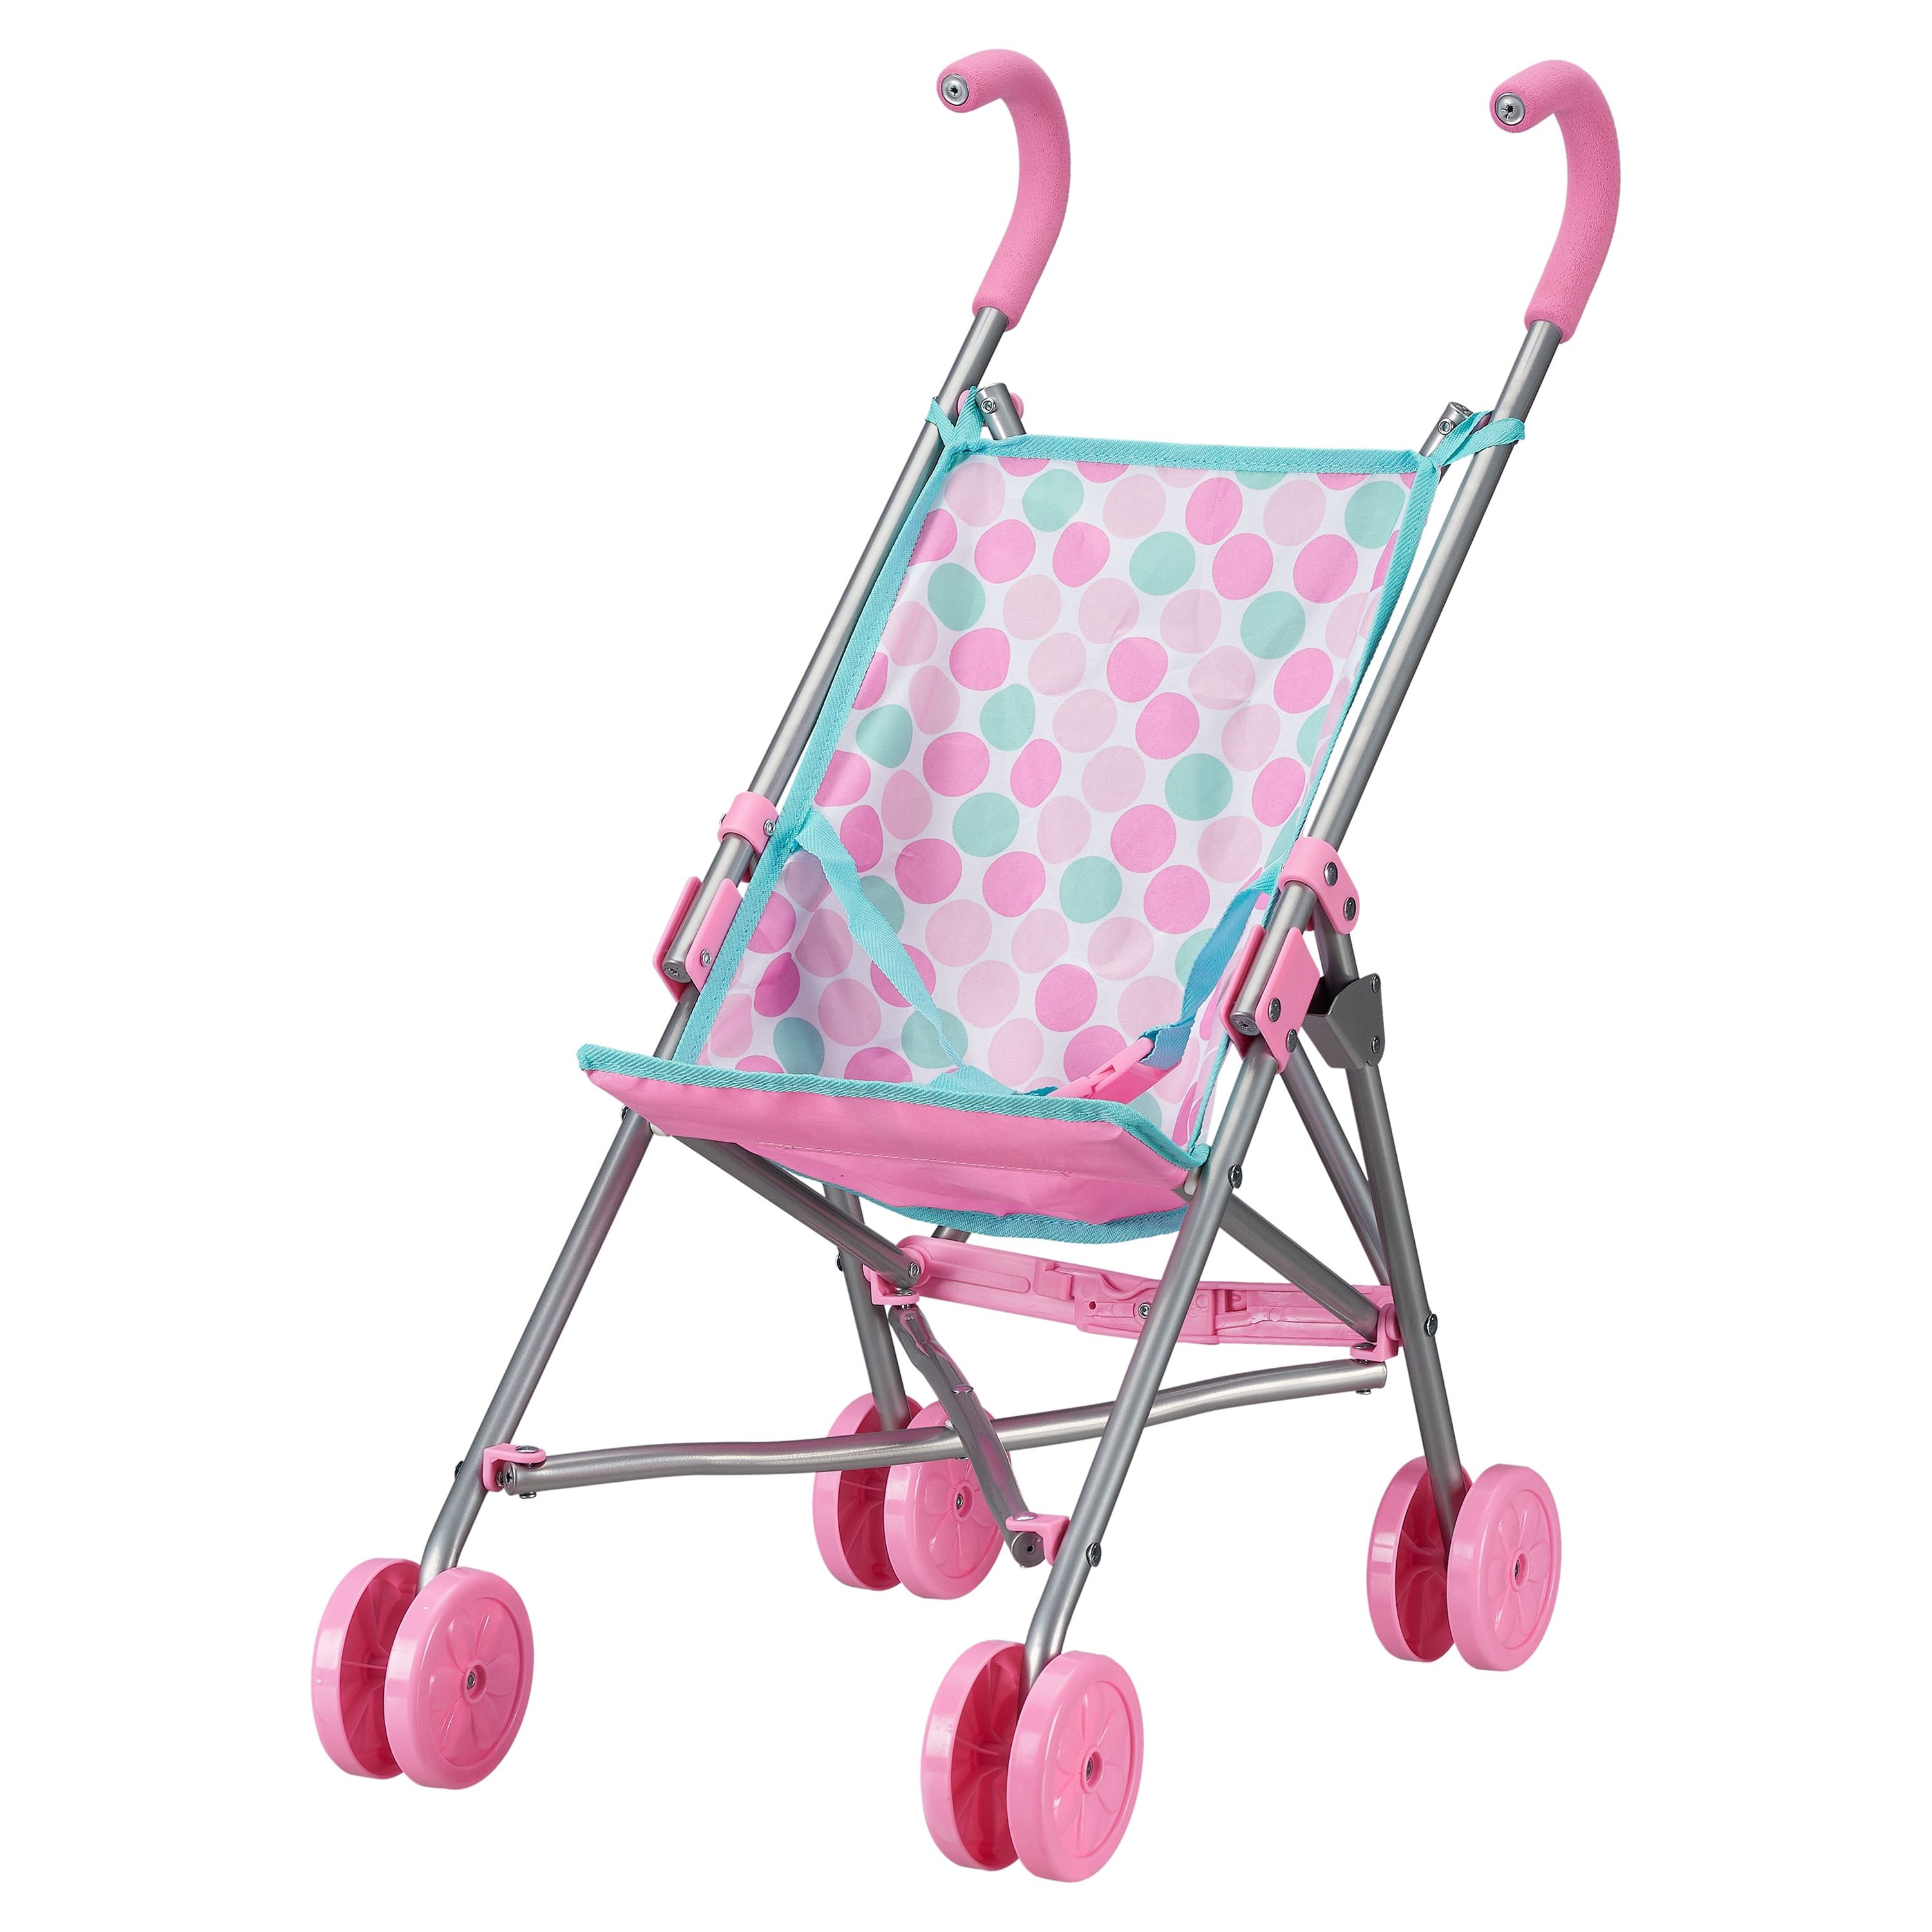 My Sweet Love Umbrella Stroller for Dolls, Multicolor - image 1 of 5